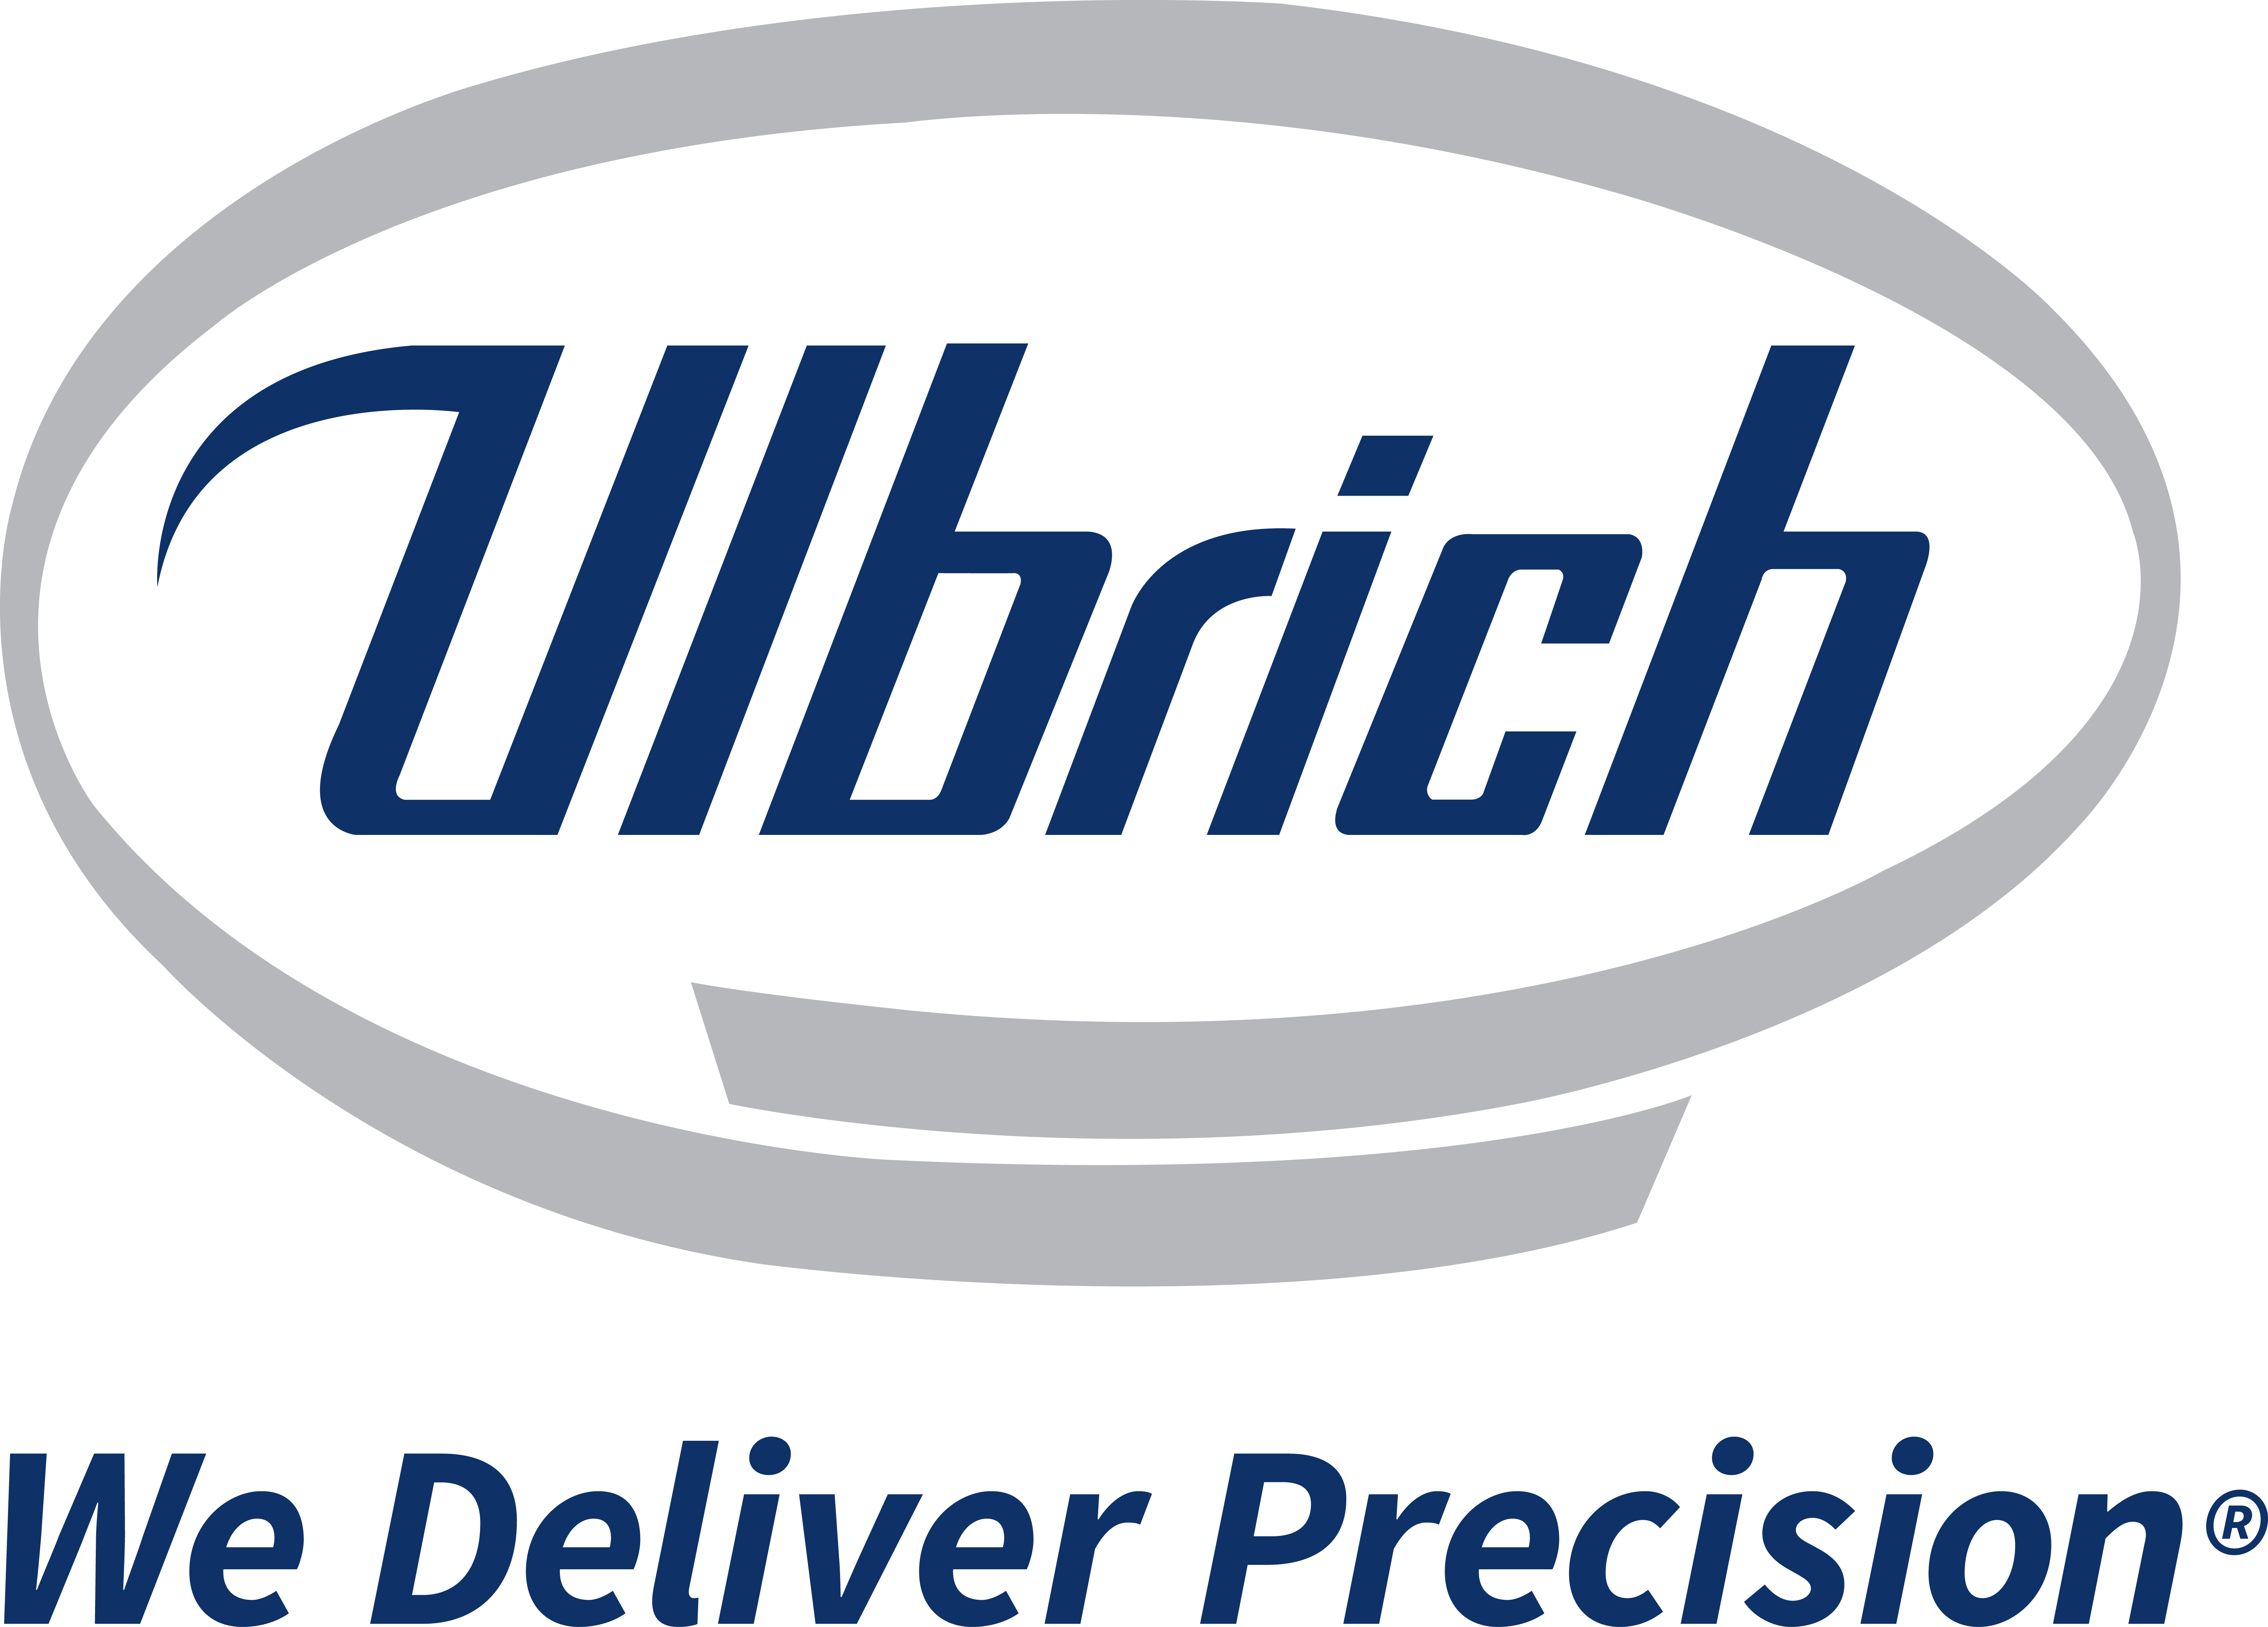 Ulbrich Stainless Steel & Special Metals, Inc.